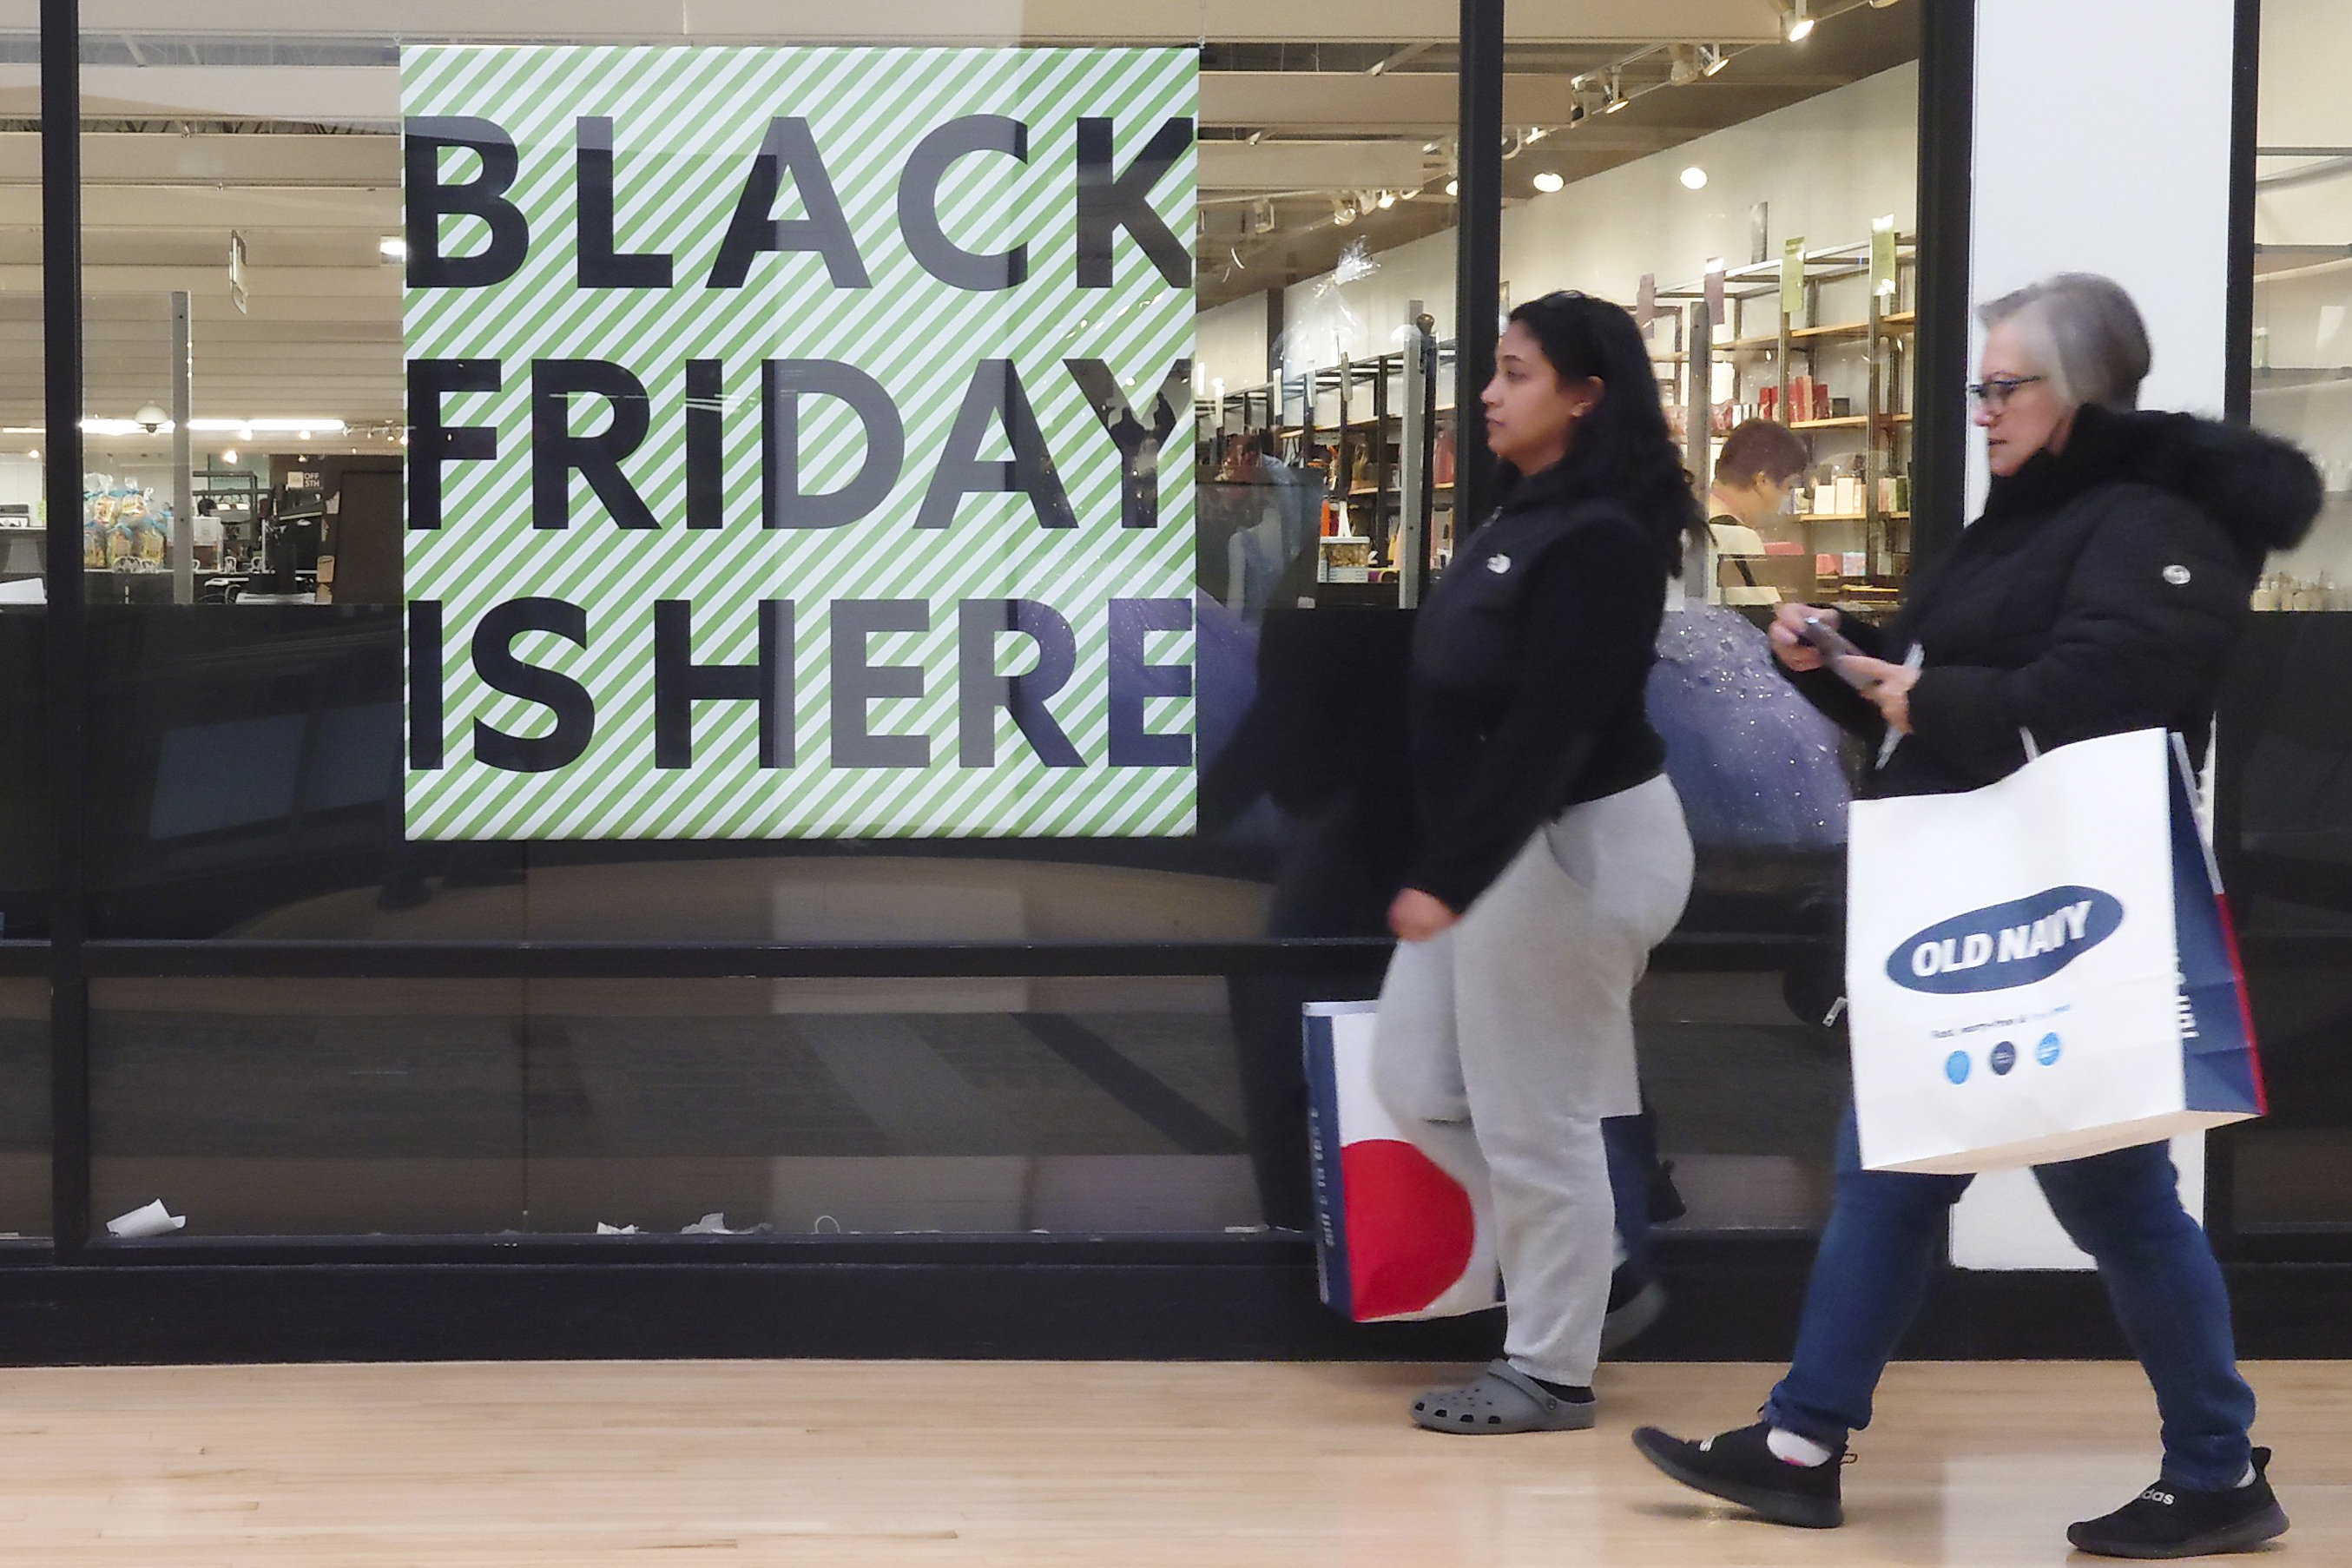 Black Friday vs. Cyber Monday: Retailers extend deals as Canadians shift shopping habits